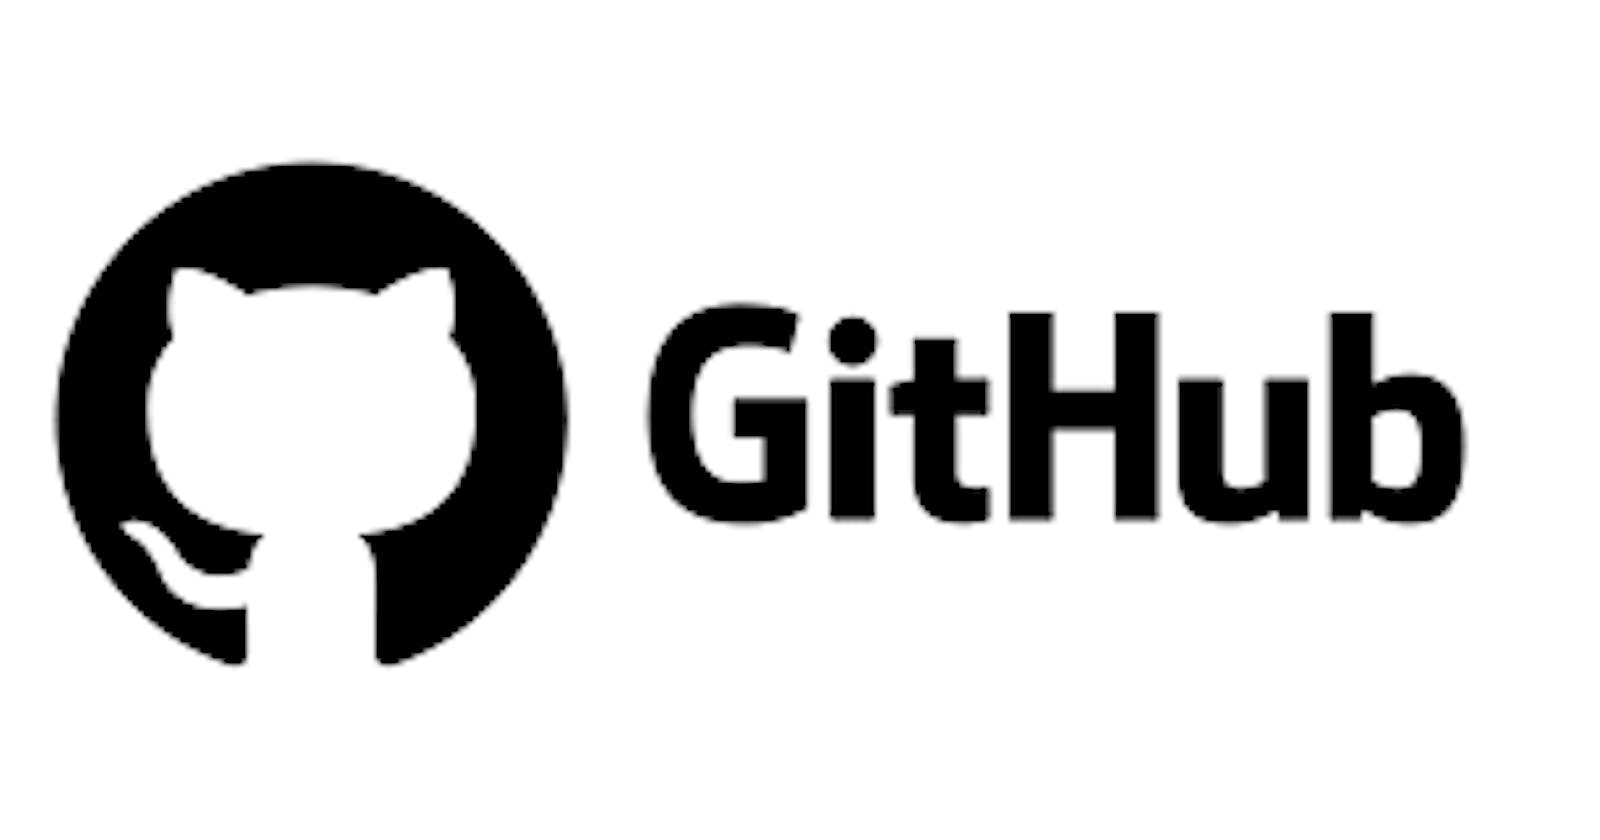 Workflow to explore Git branching and merging with a local repository